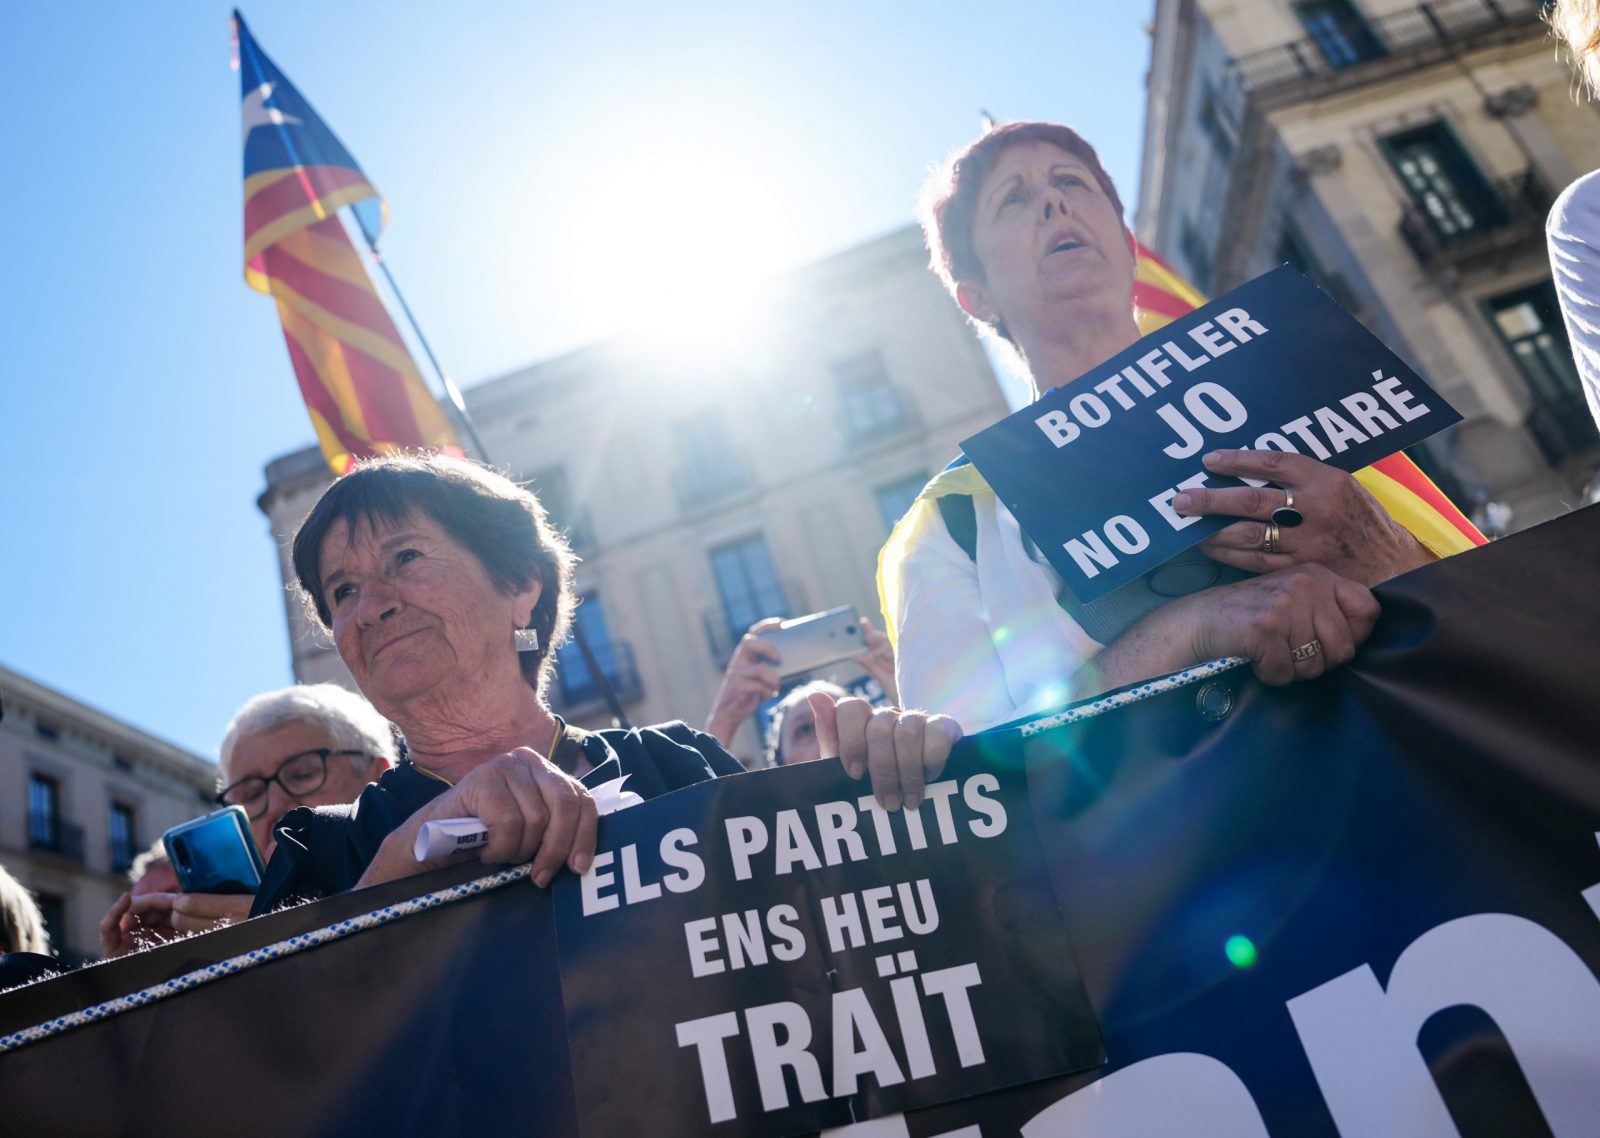 epa10218193 People attend a protest organized by Catalan pro-independence association Catalan National Assembly (ANC) as a commemorative act for the 5th anniversary of the Catalan independence referendum of 2017, in Barcelona, Catalonia, Spain, 01 October 2022.  EPA/ENRIC FONTCUBERTA